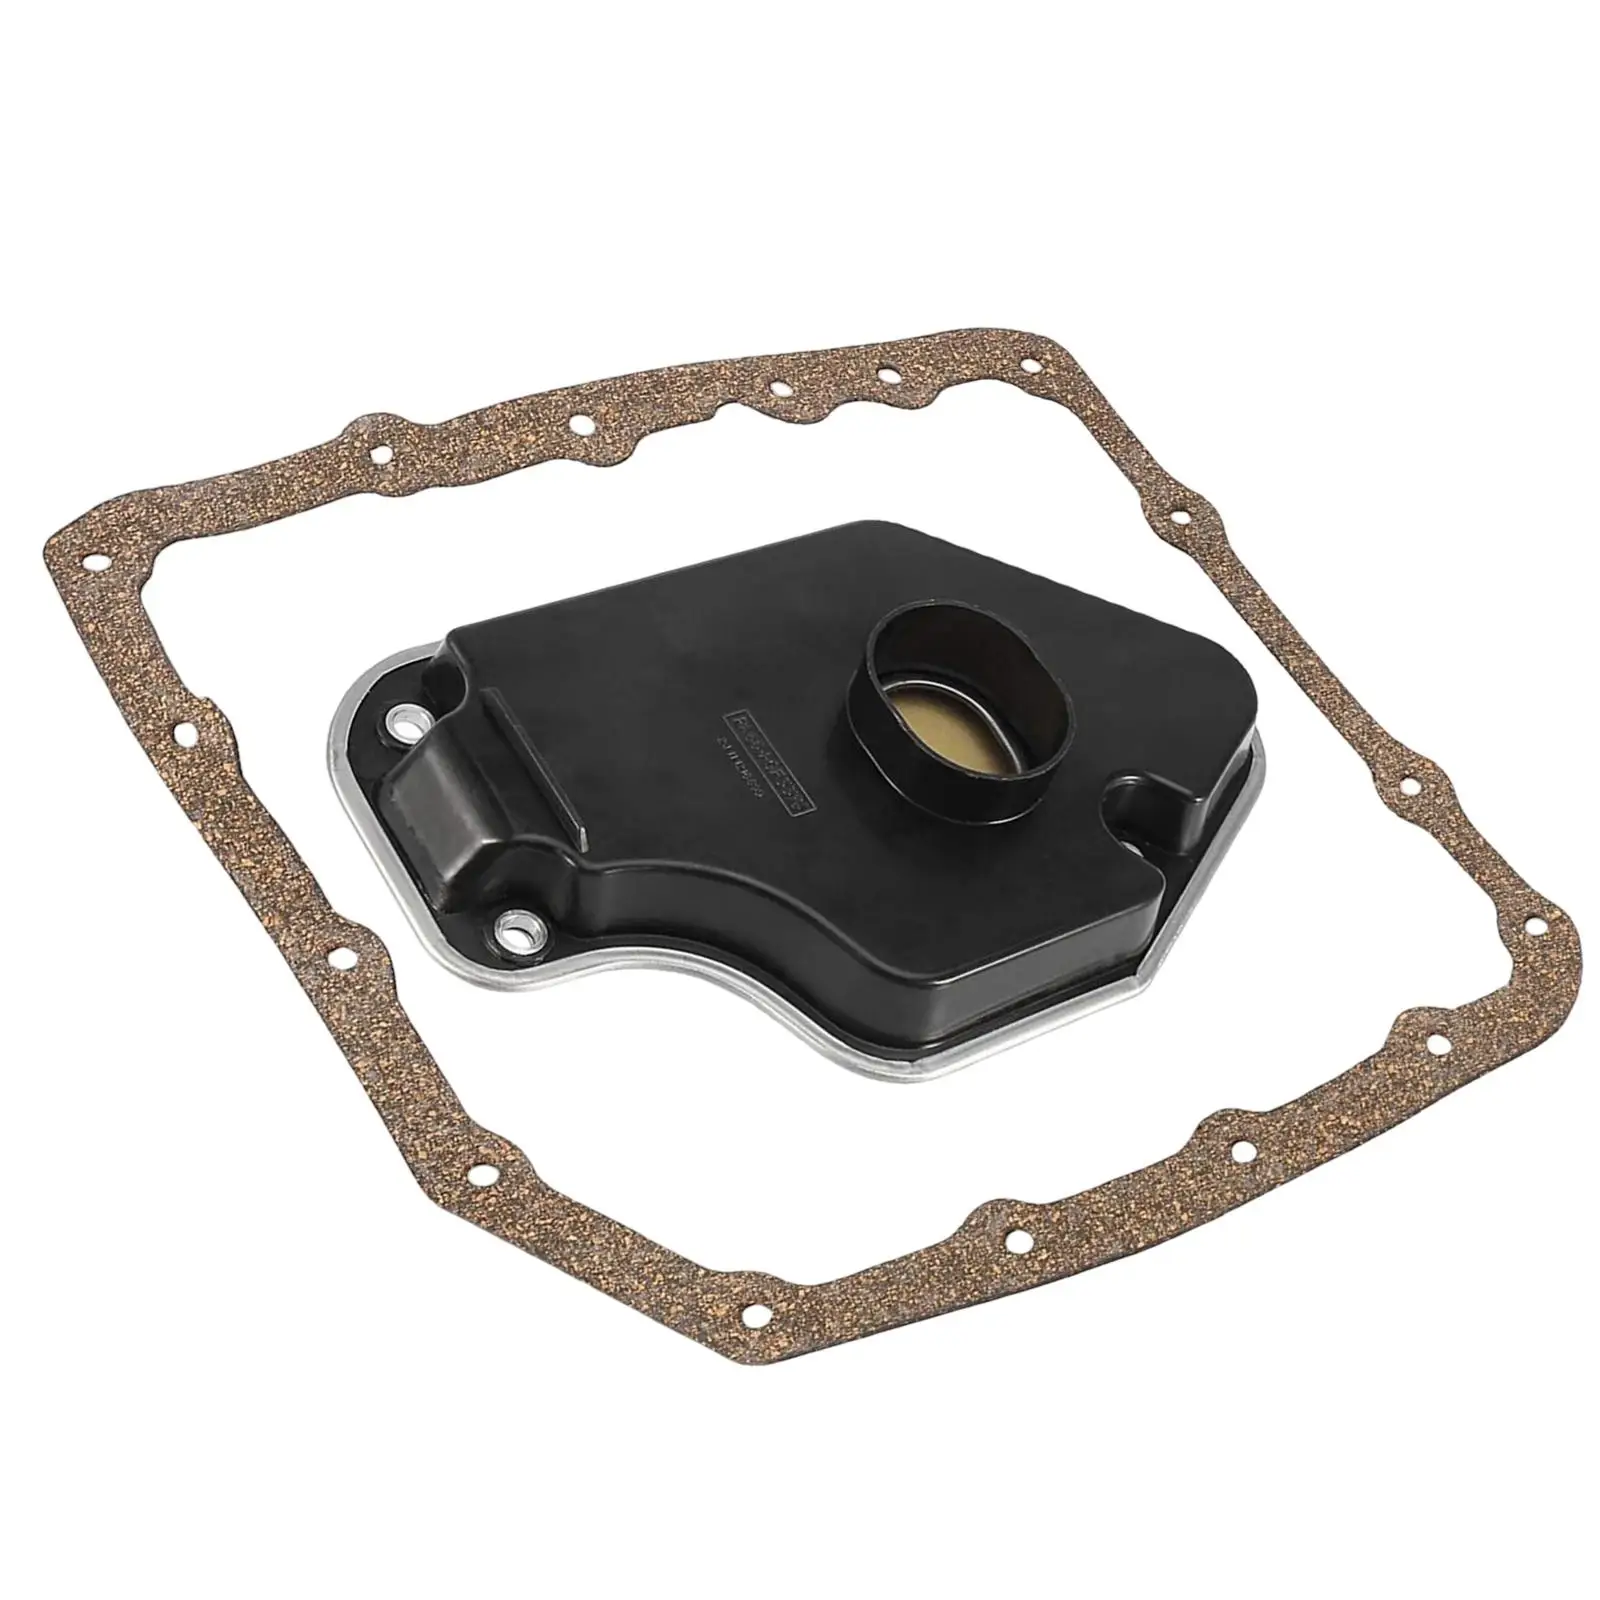 Auto Transmission Filter Oil Pan Gasket Kit, for BMW, 96015432 Parts Replace Easy to Install